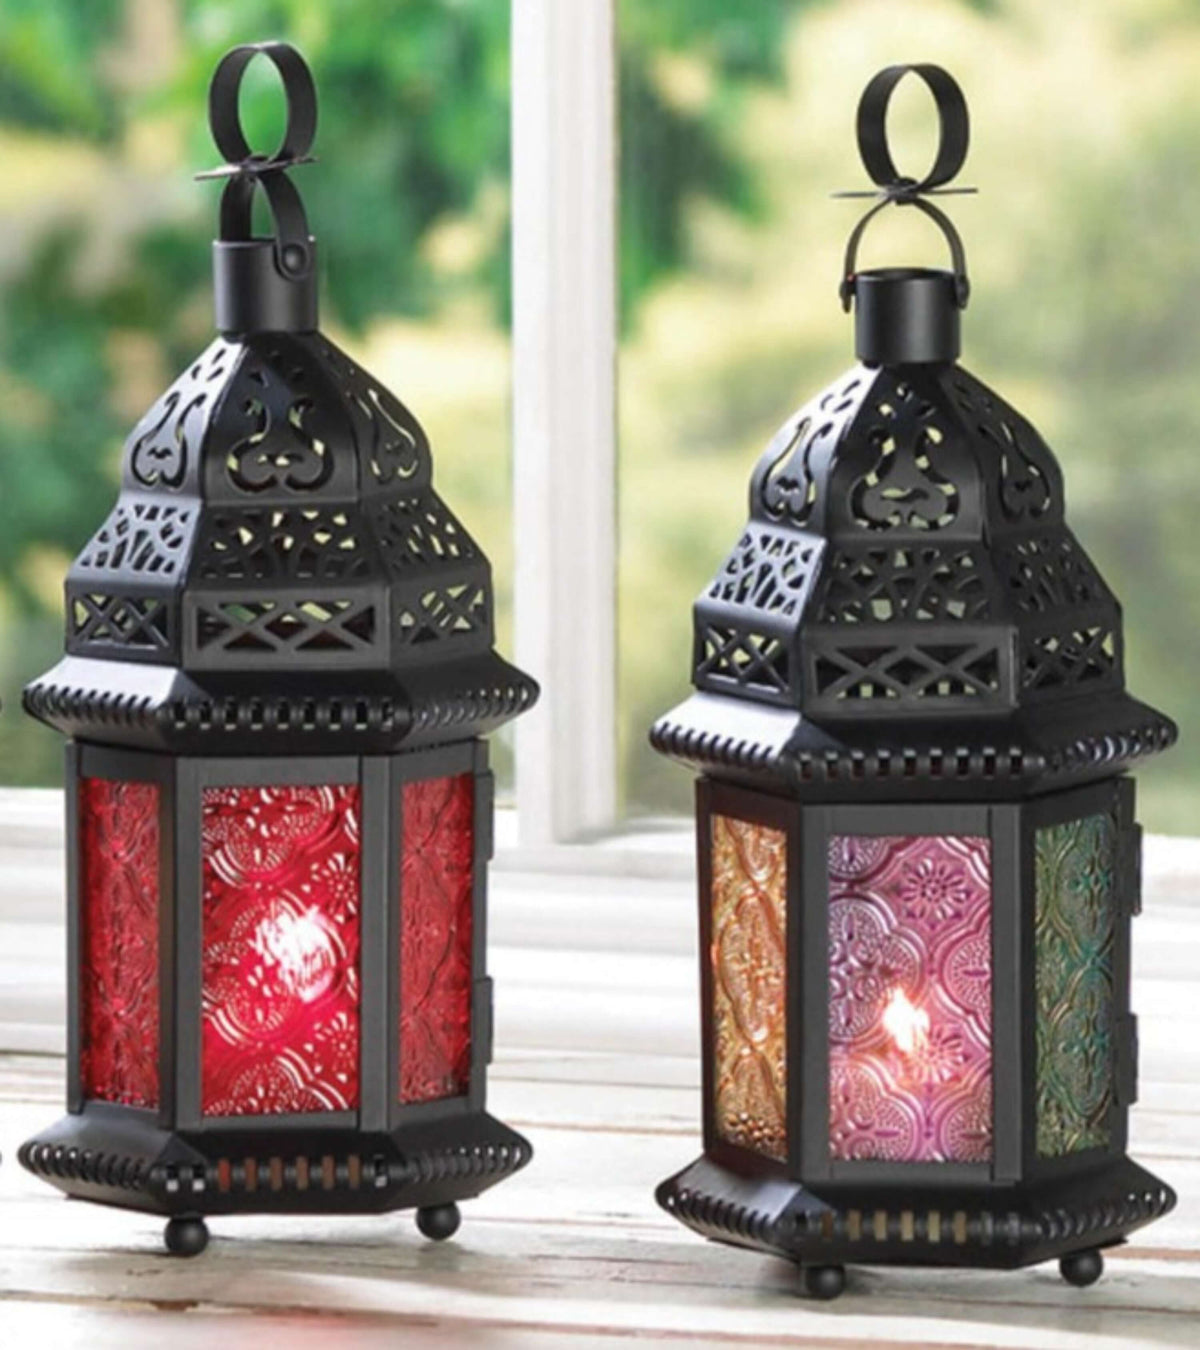 Rainbow and Red Glass Moroccan Lanterns- The House of Awareness